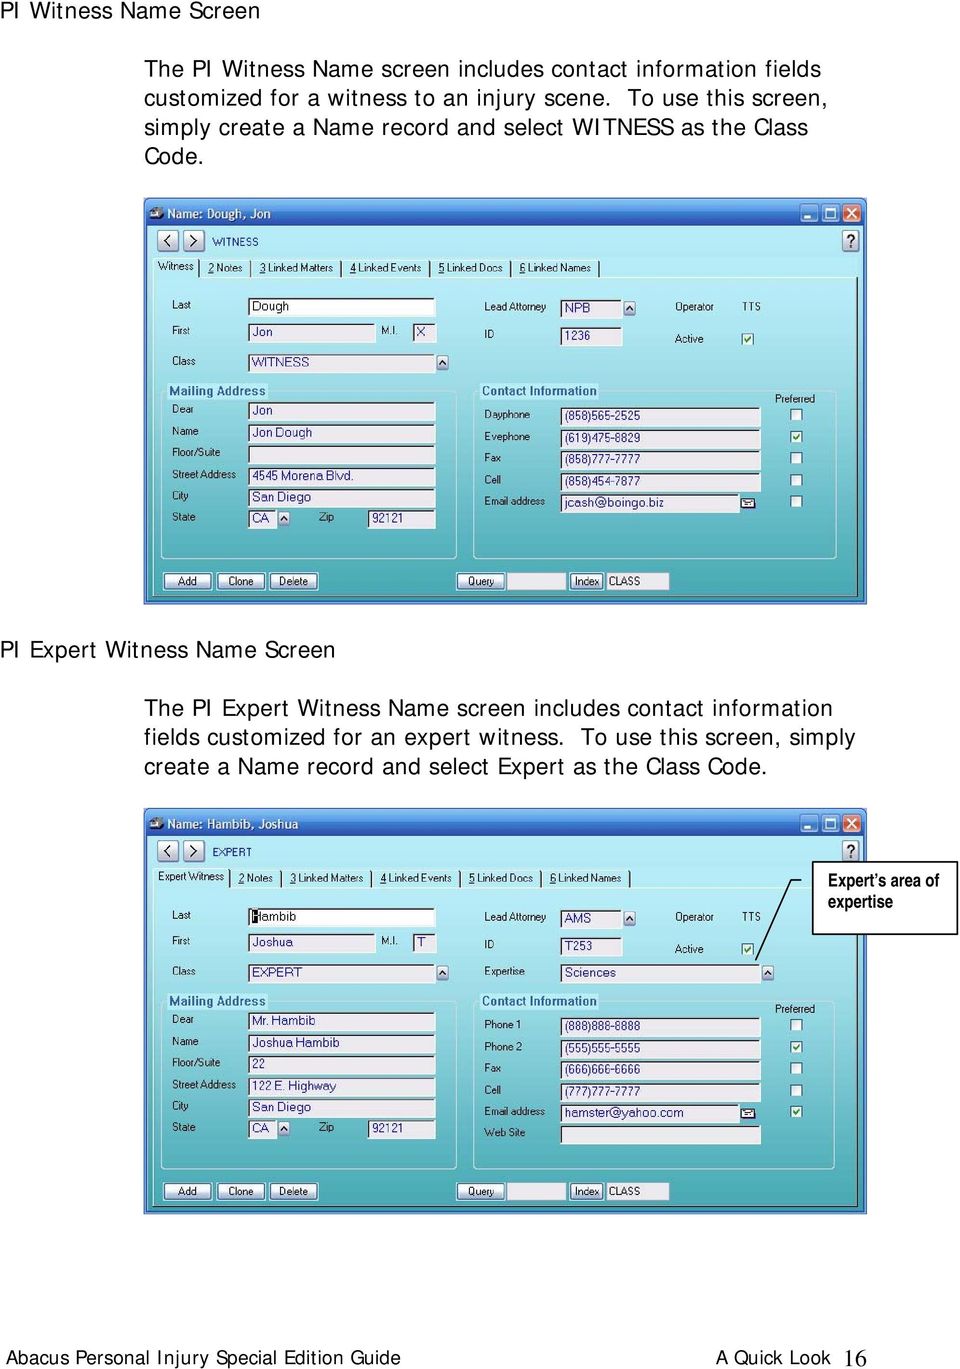 PI Expert Witness Name Screen The PI Expert Witness Name screen includes contact information fields customized for an expert